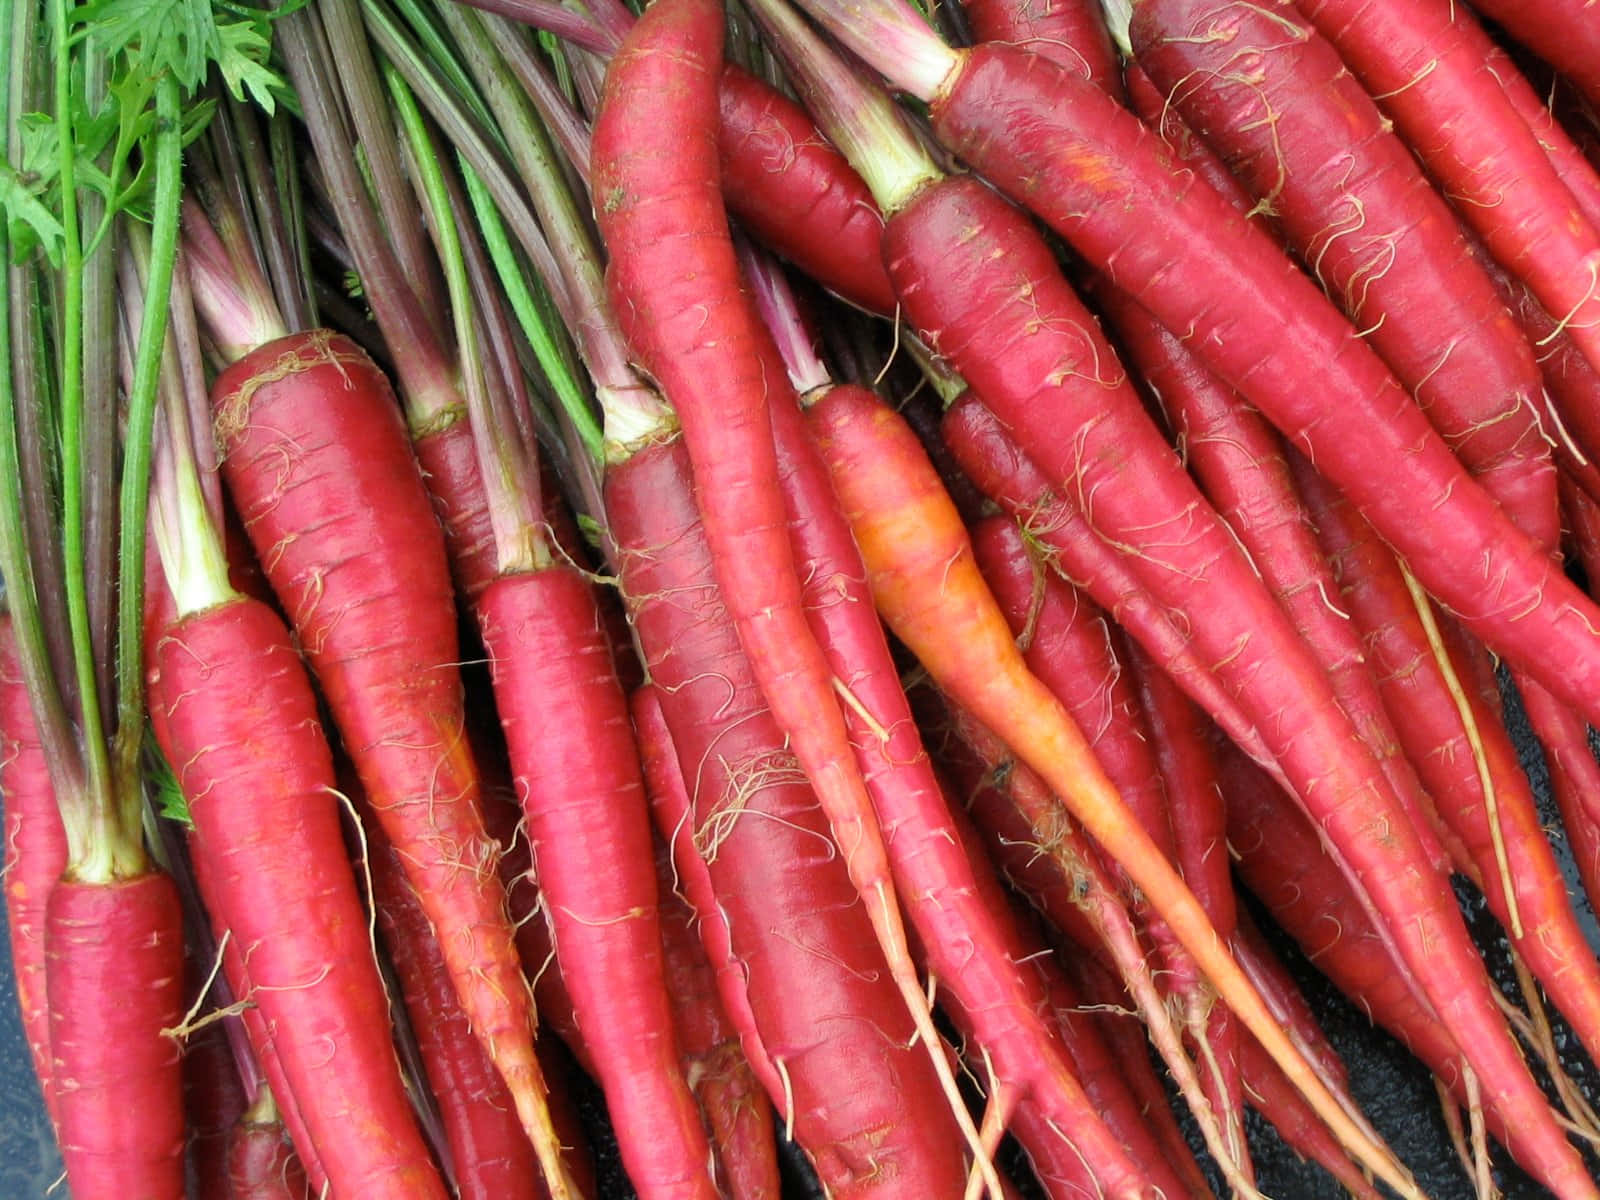 A Bunch Of Carrots On A Table